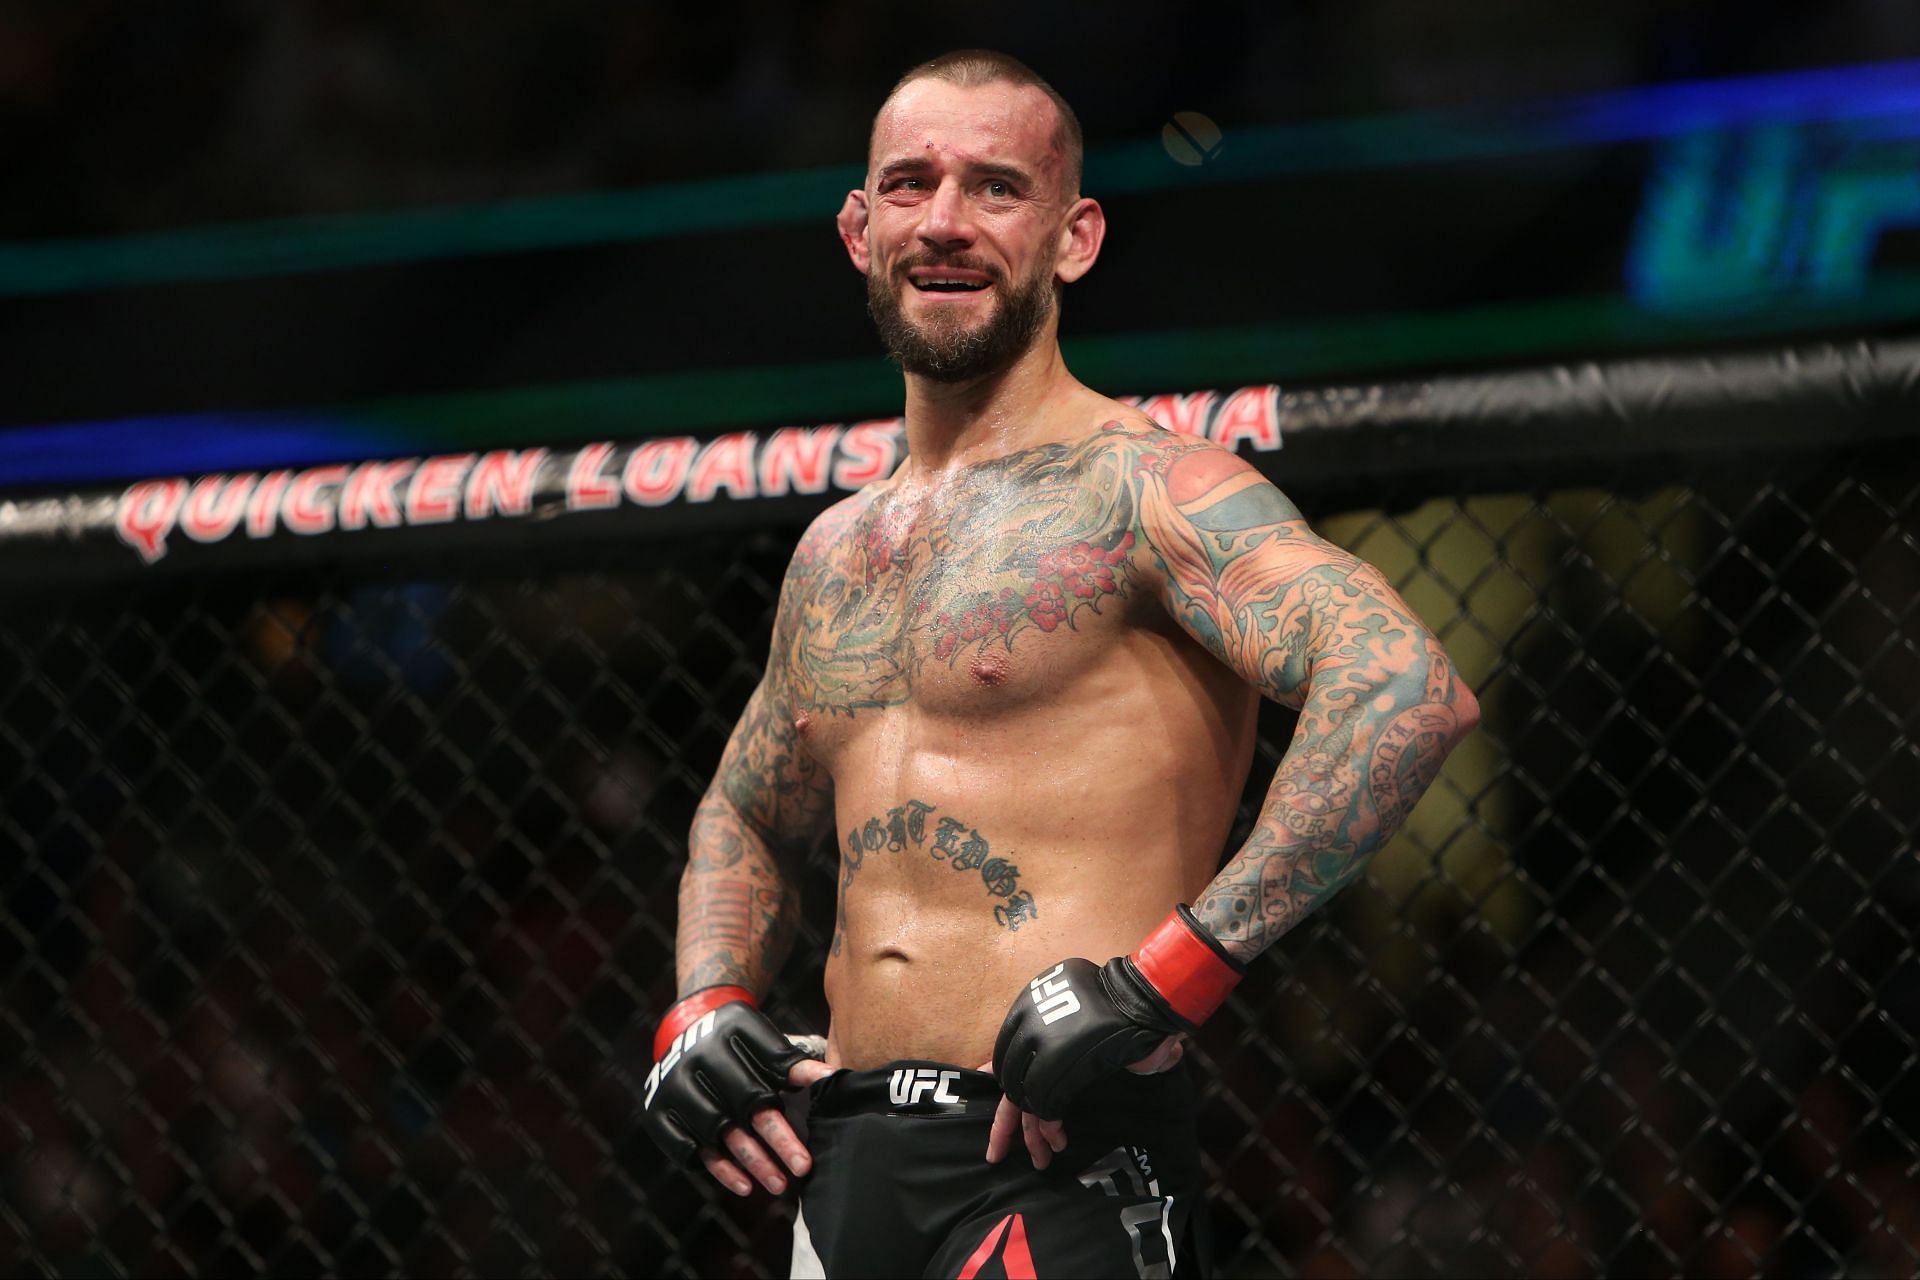 CM Punk has competed in both the UFC and AEW